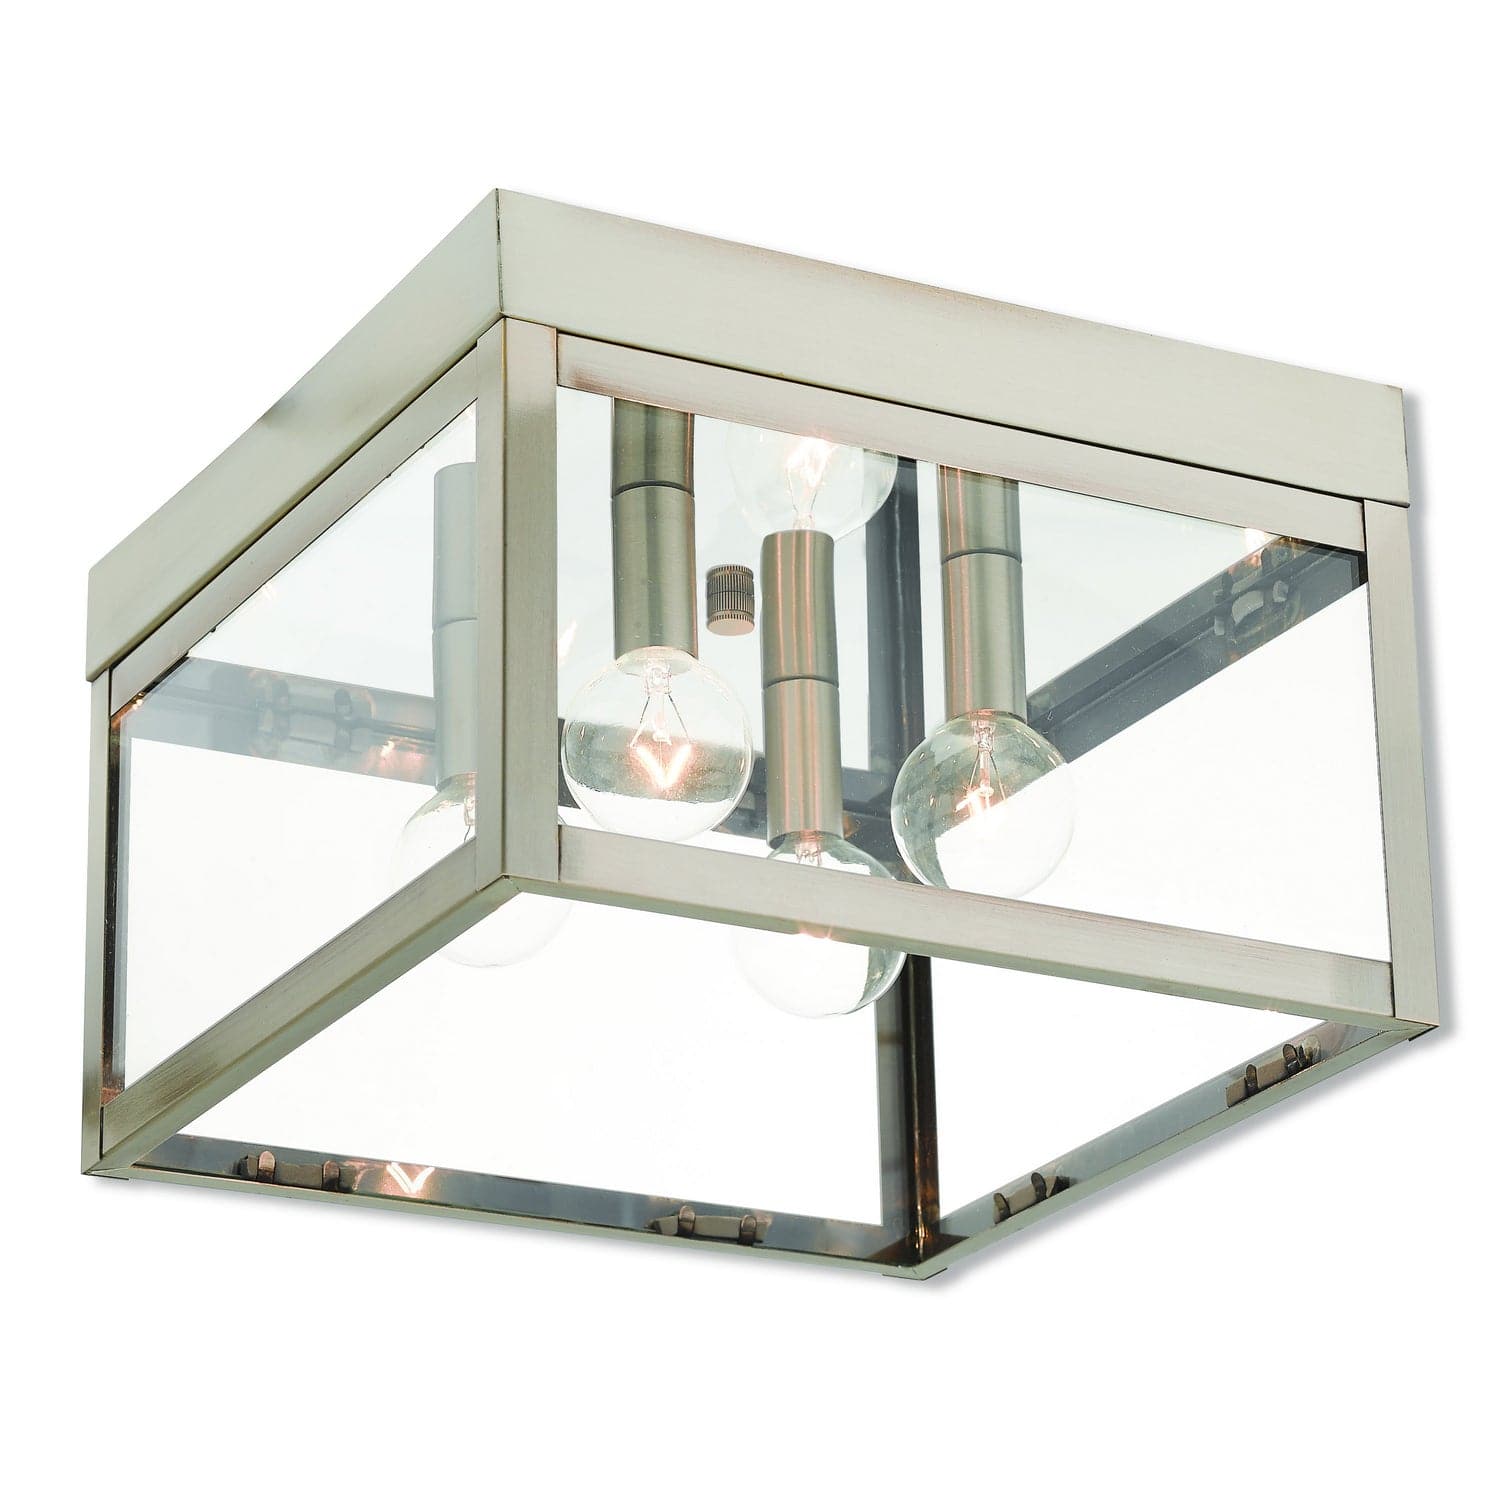 Livex Lighting - 20589-91 - Four Light Outdoor Ceiling Mount - Nyack - Brushed Nickel w/ Polished Chrome Stainless Steel